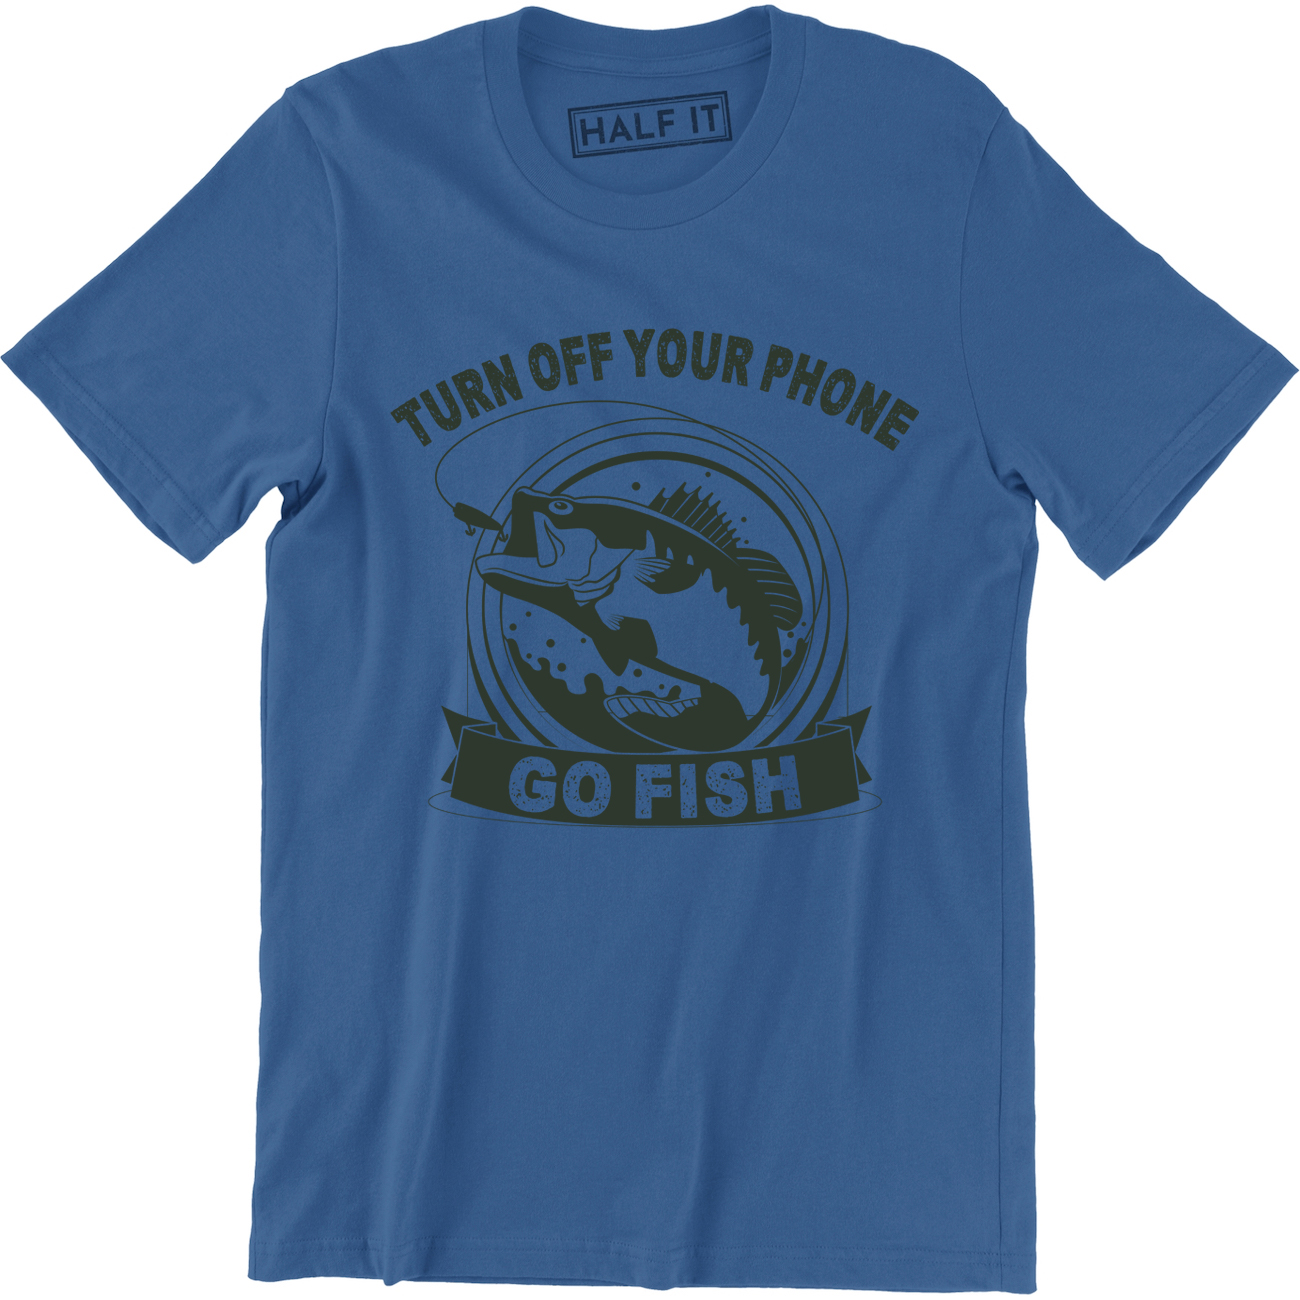 The Walleye Are Calling and I Must Go Fish Shirt (Style: T-Shirt, Color: Black, Size: L)